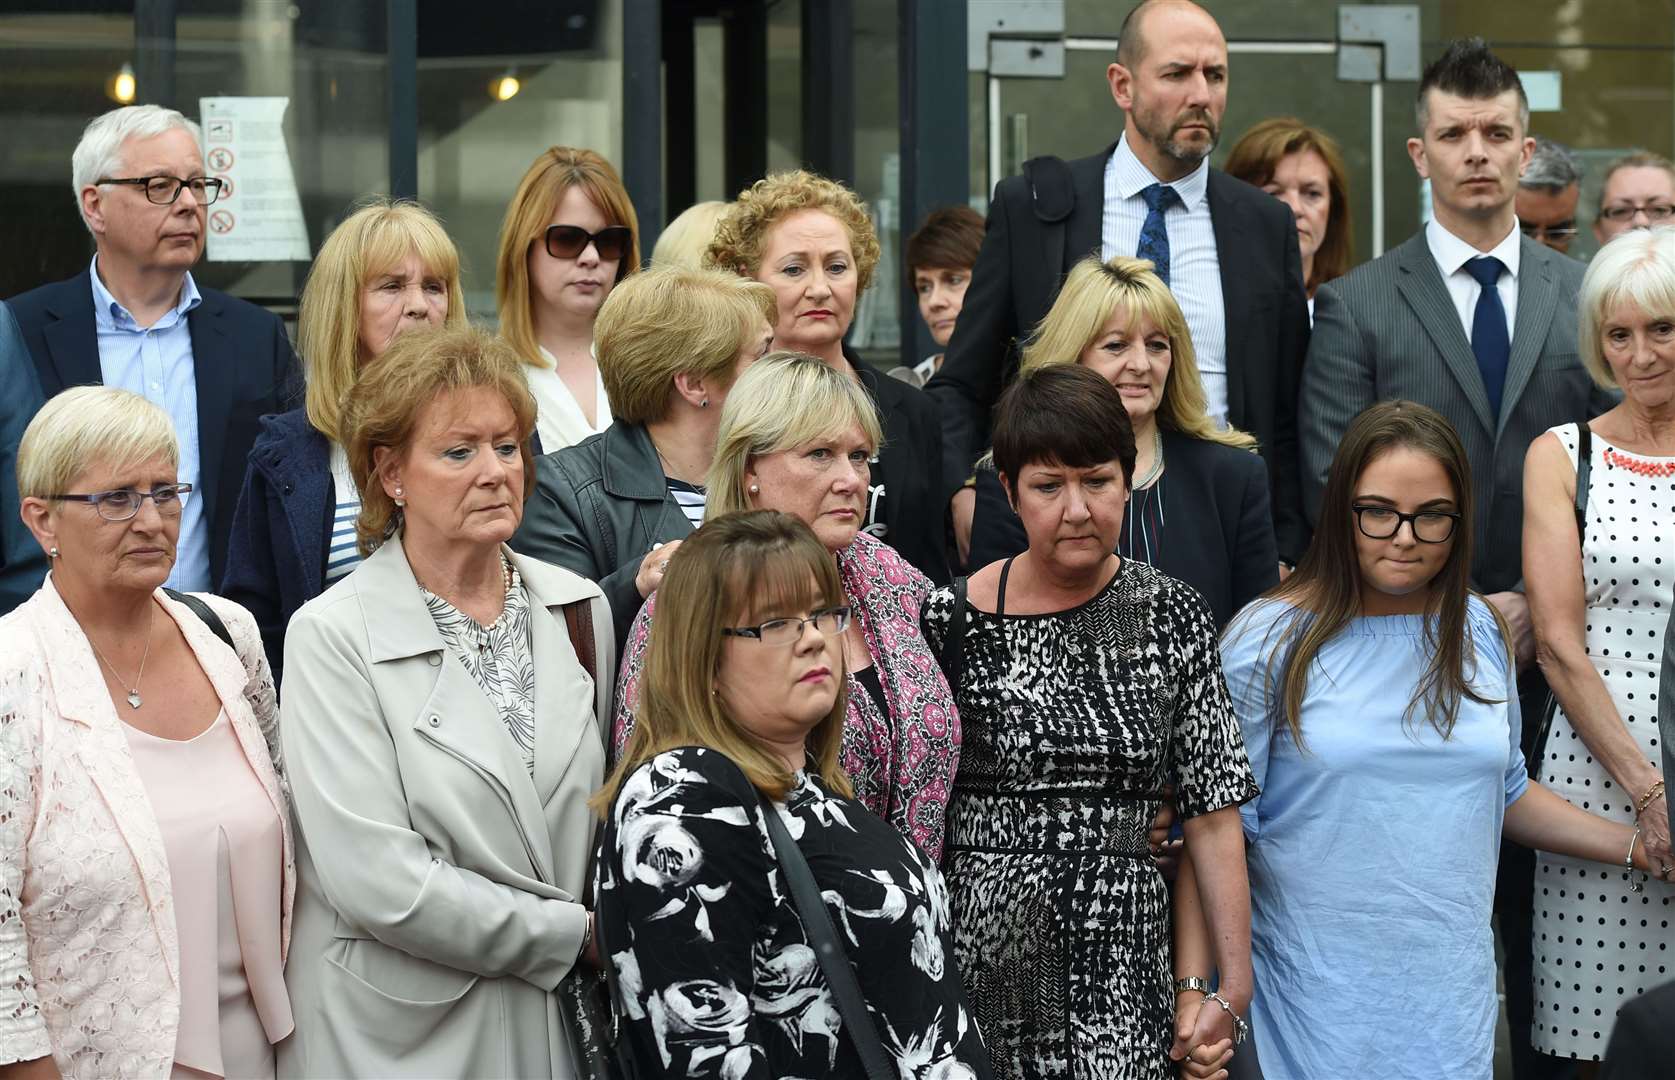 Several of Ian Paterson’s victims attended his sentencing at Nottingham Crown Court in 2017 (Joe Giddens/PA)